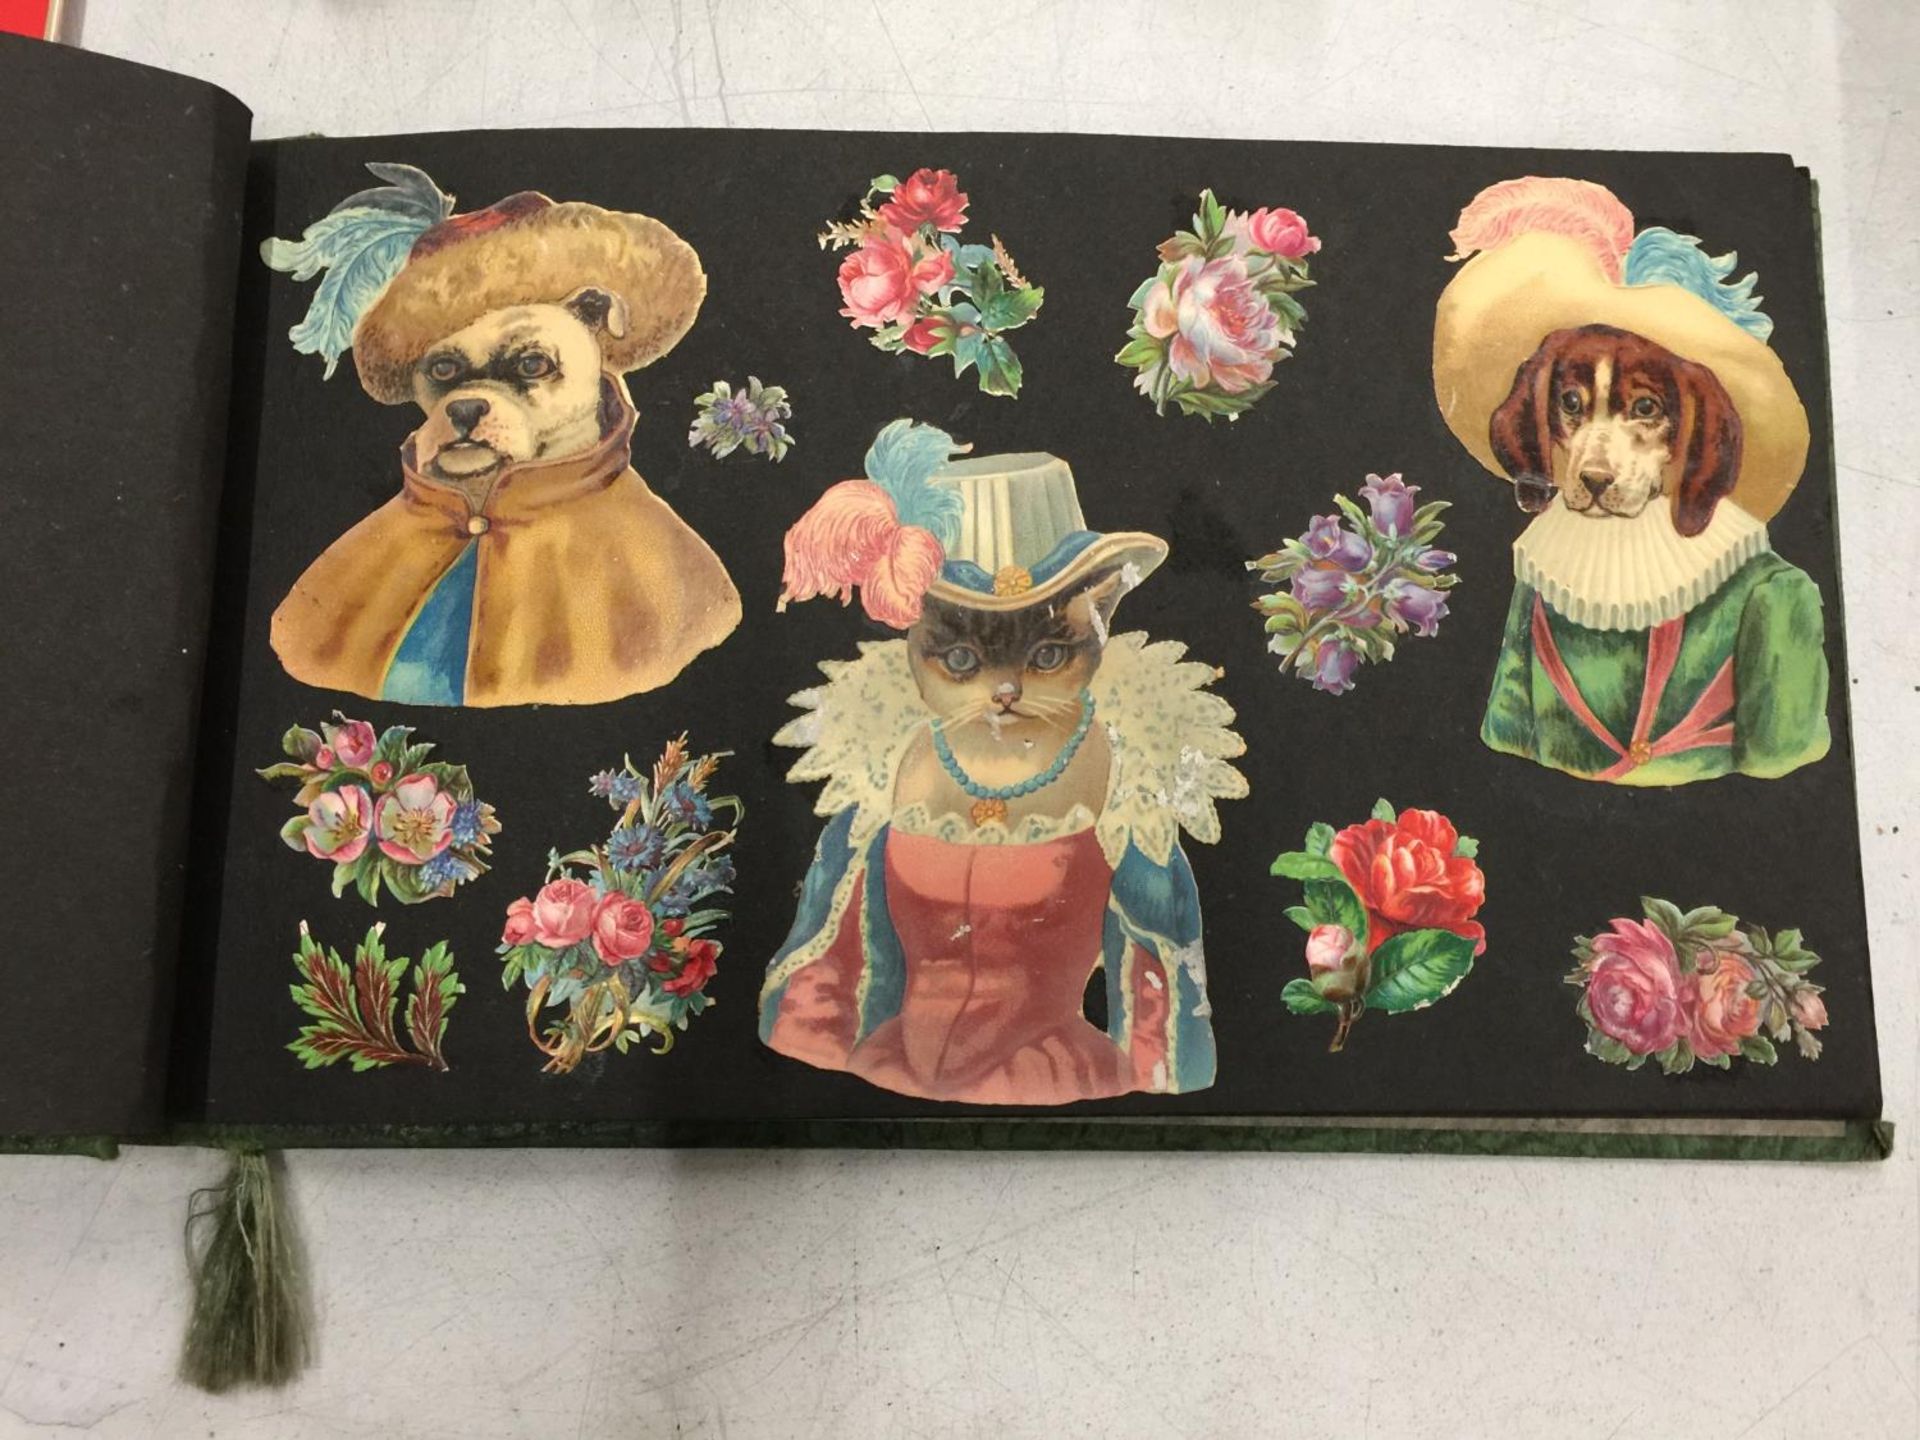 A VINTAGE SCRAPBOOK FILLED WITH VICTORIAN IMAGES - Image 4 of 5